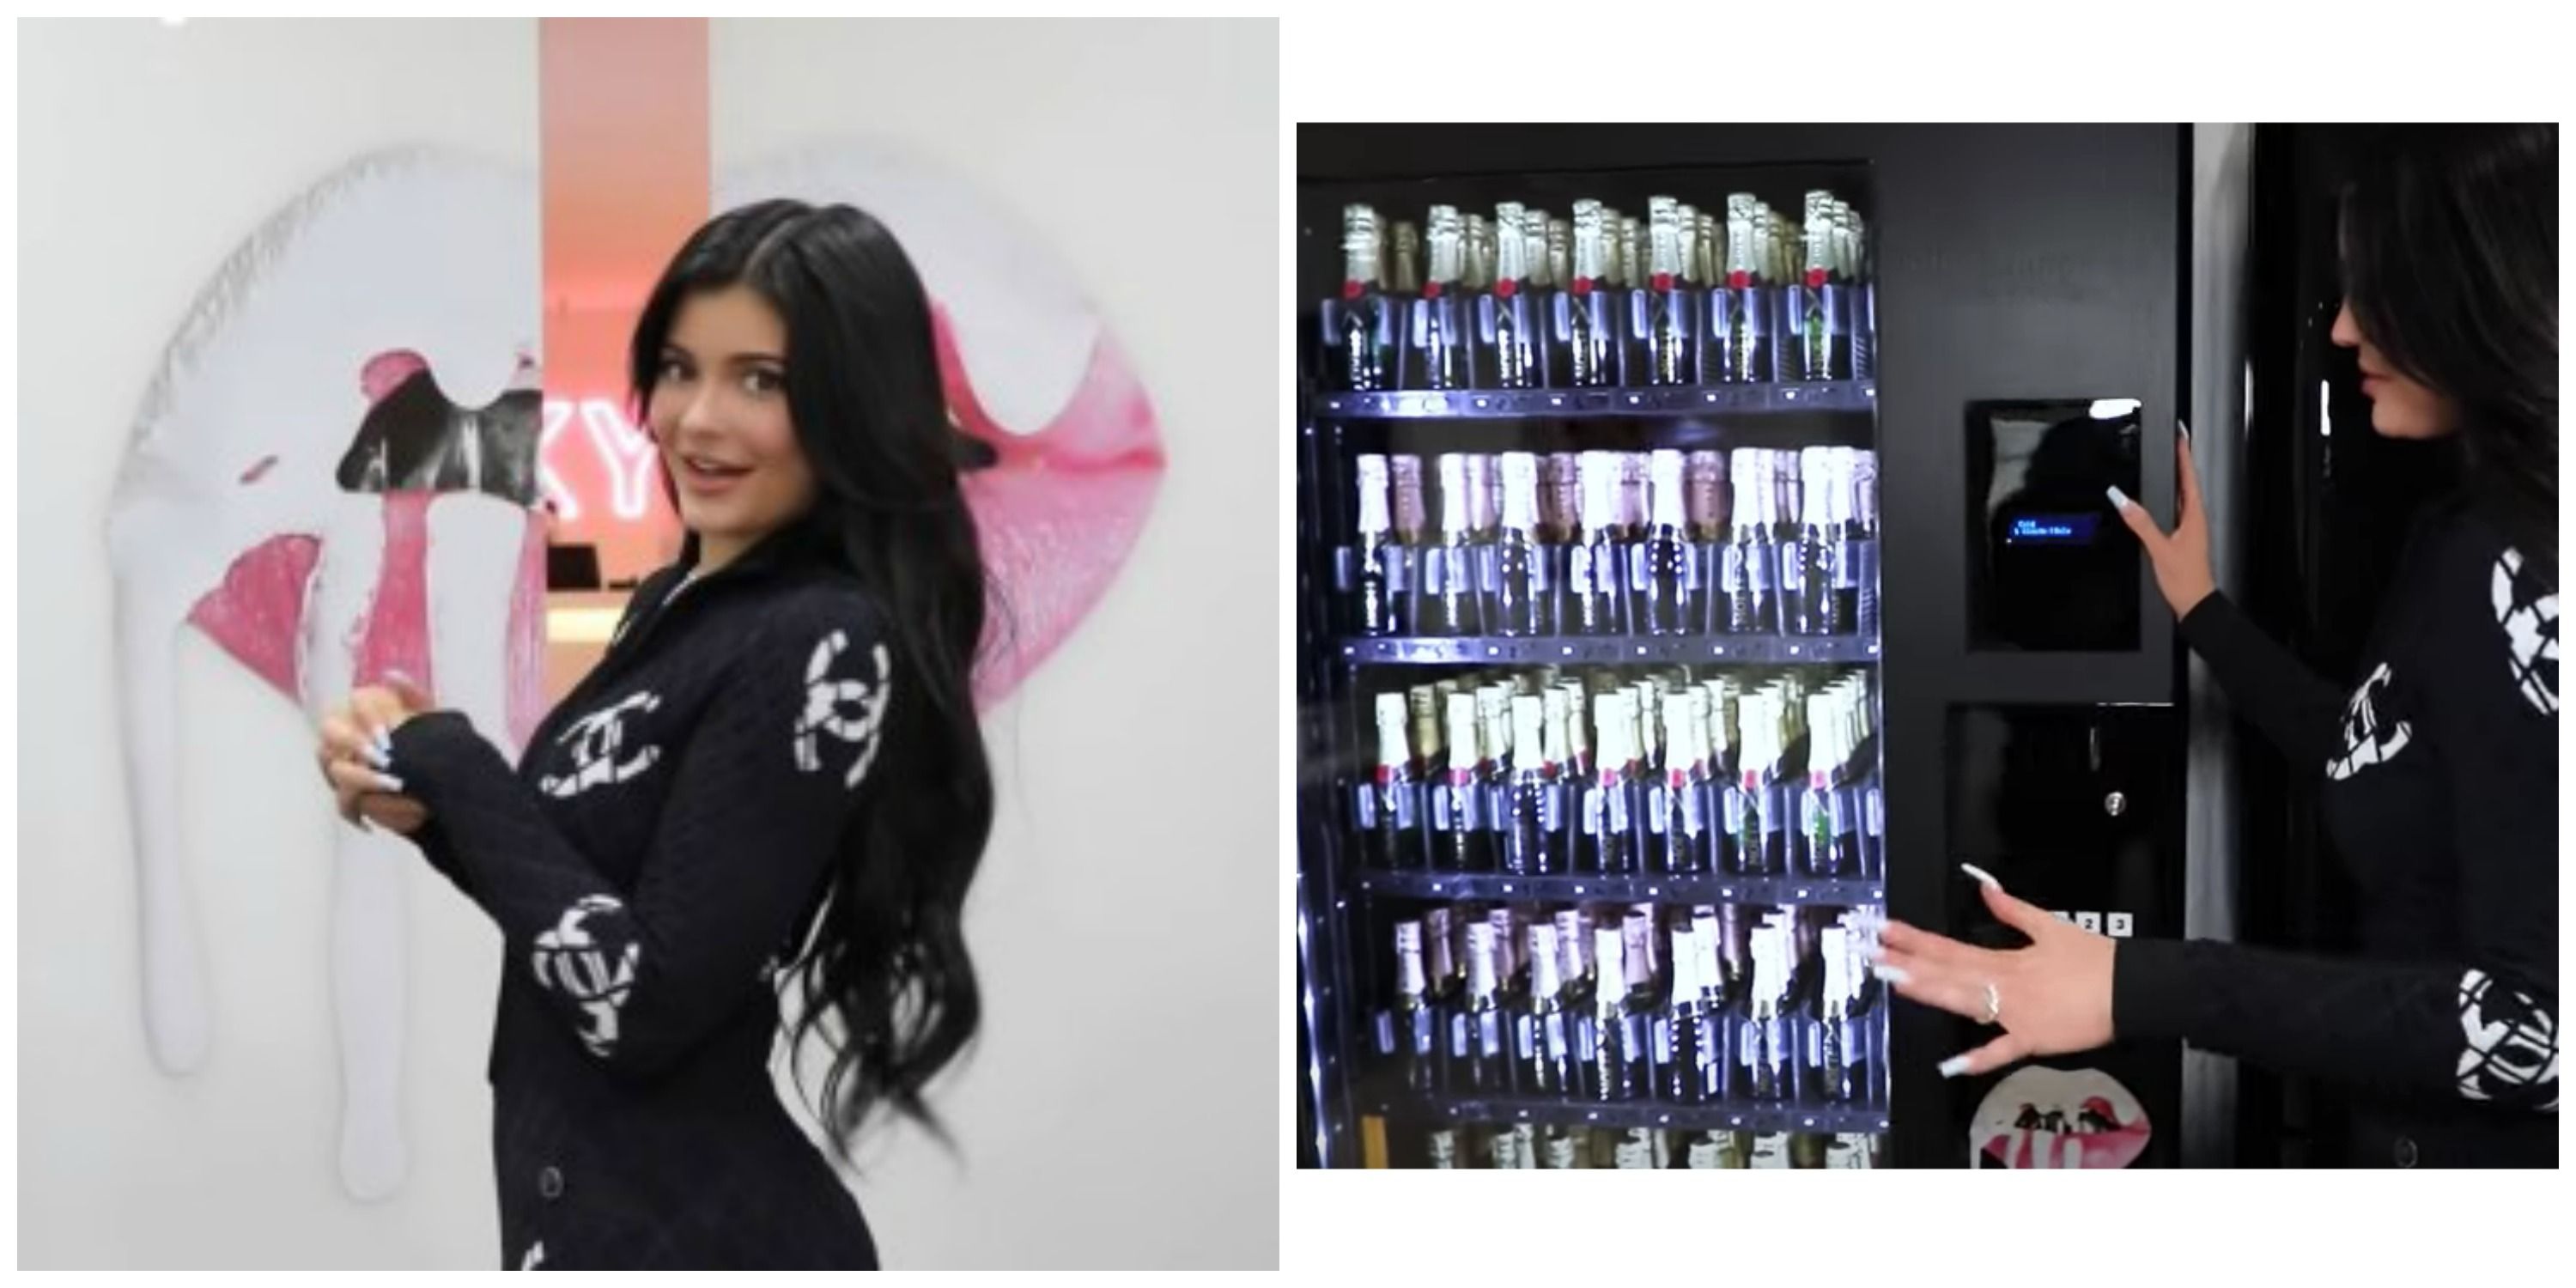 Kylie Jenner Shares an Official Office Tour of Kylie Cosmetics HQ